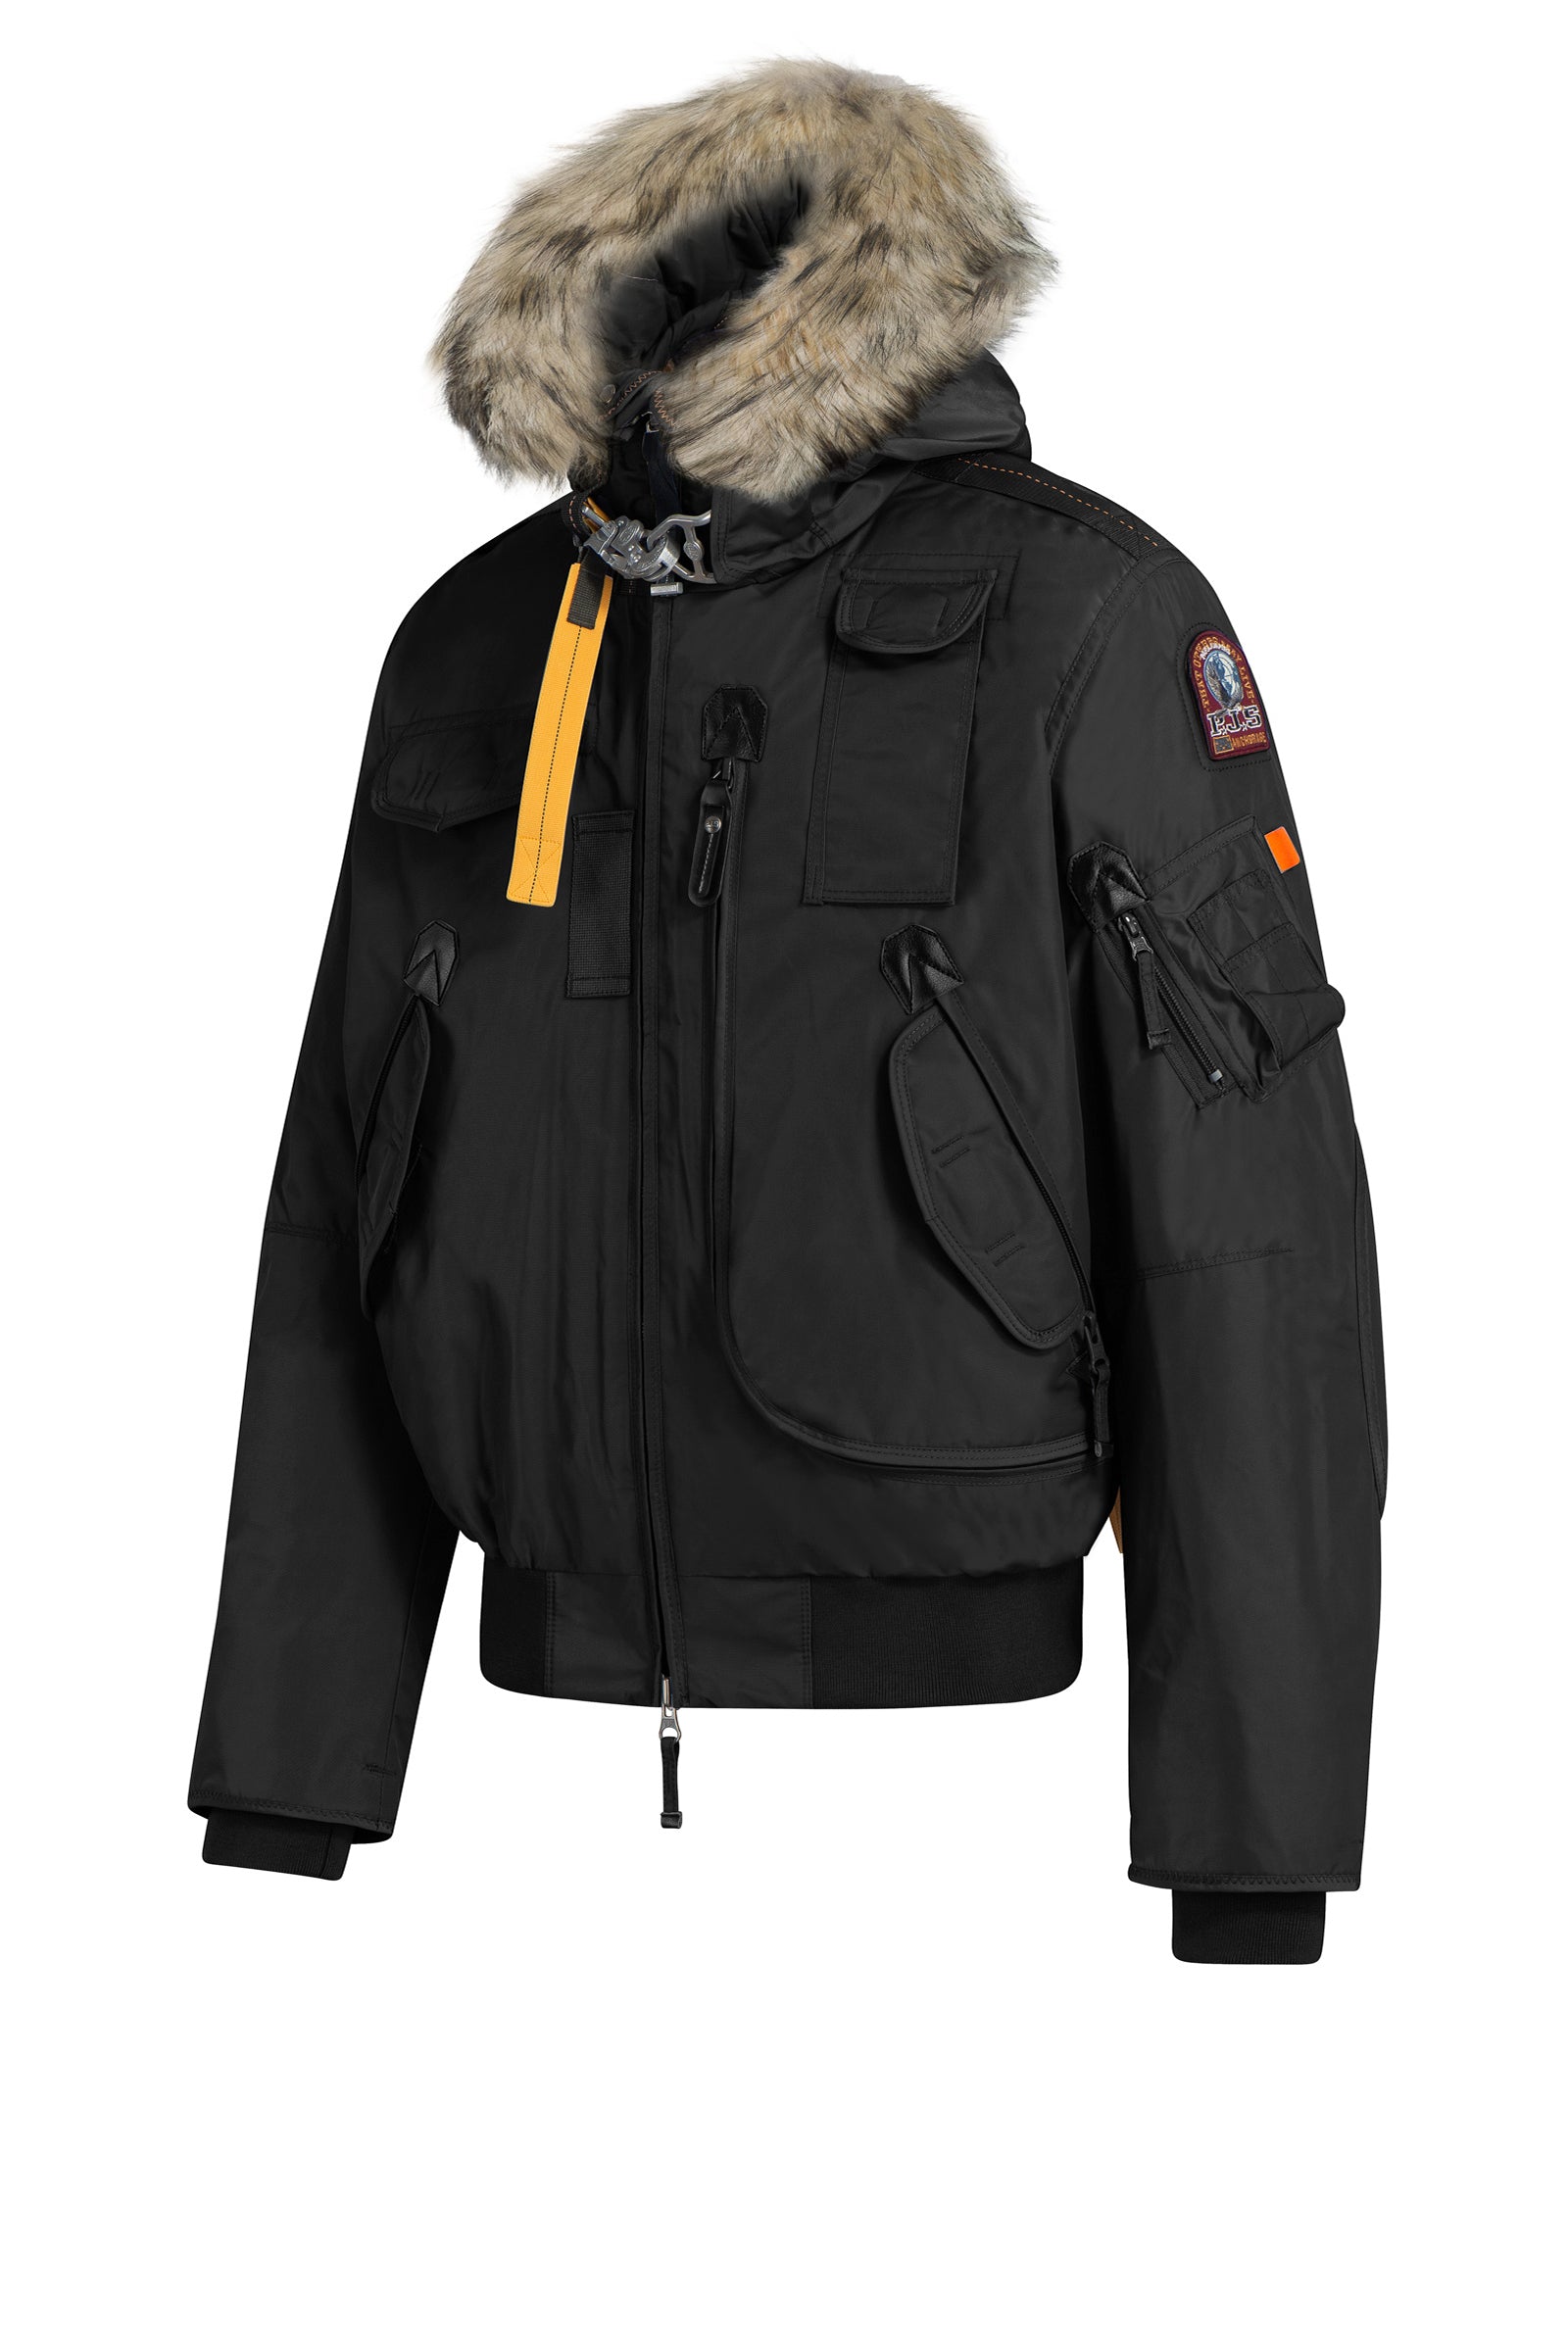 parajumpers promo code